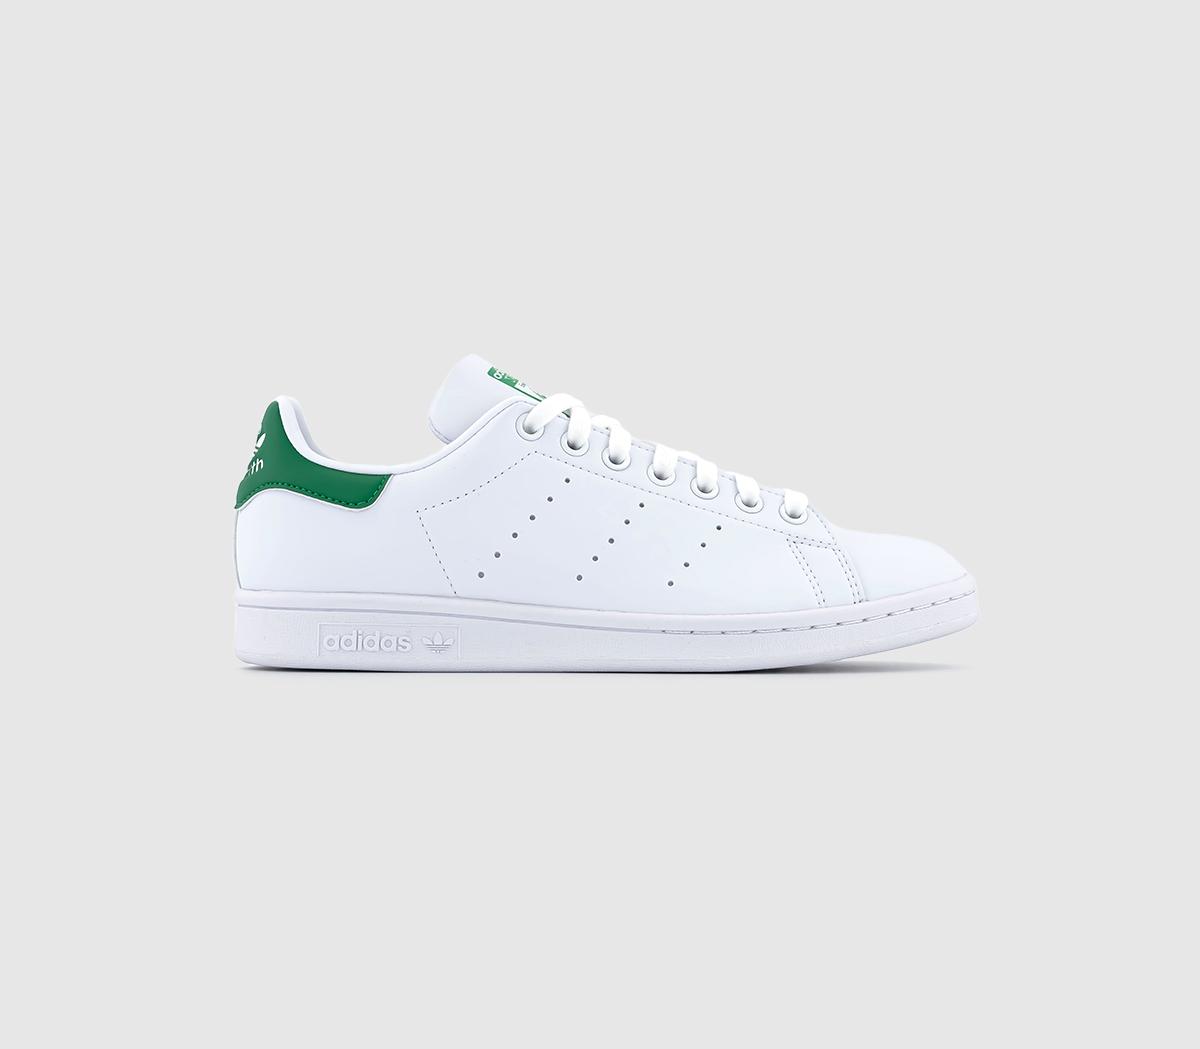 Støvet vente Mob adidas Stan Smith Trainers White Green - Women's Classic Trainers